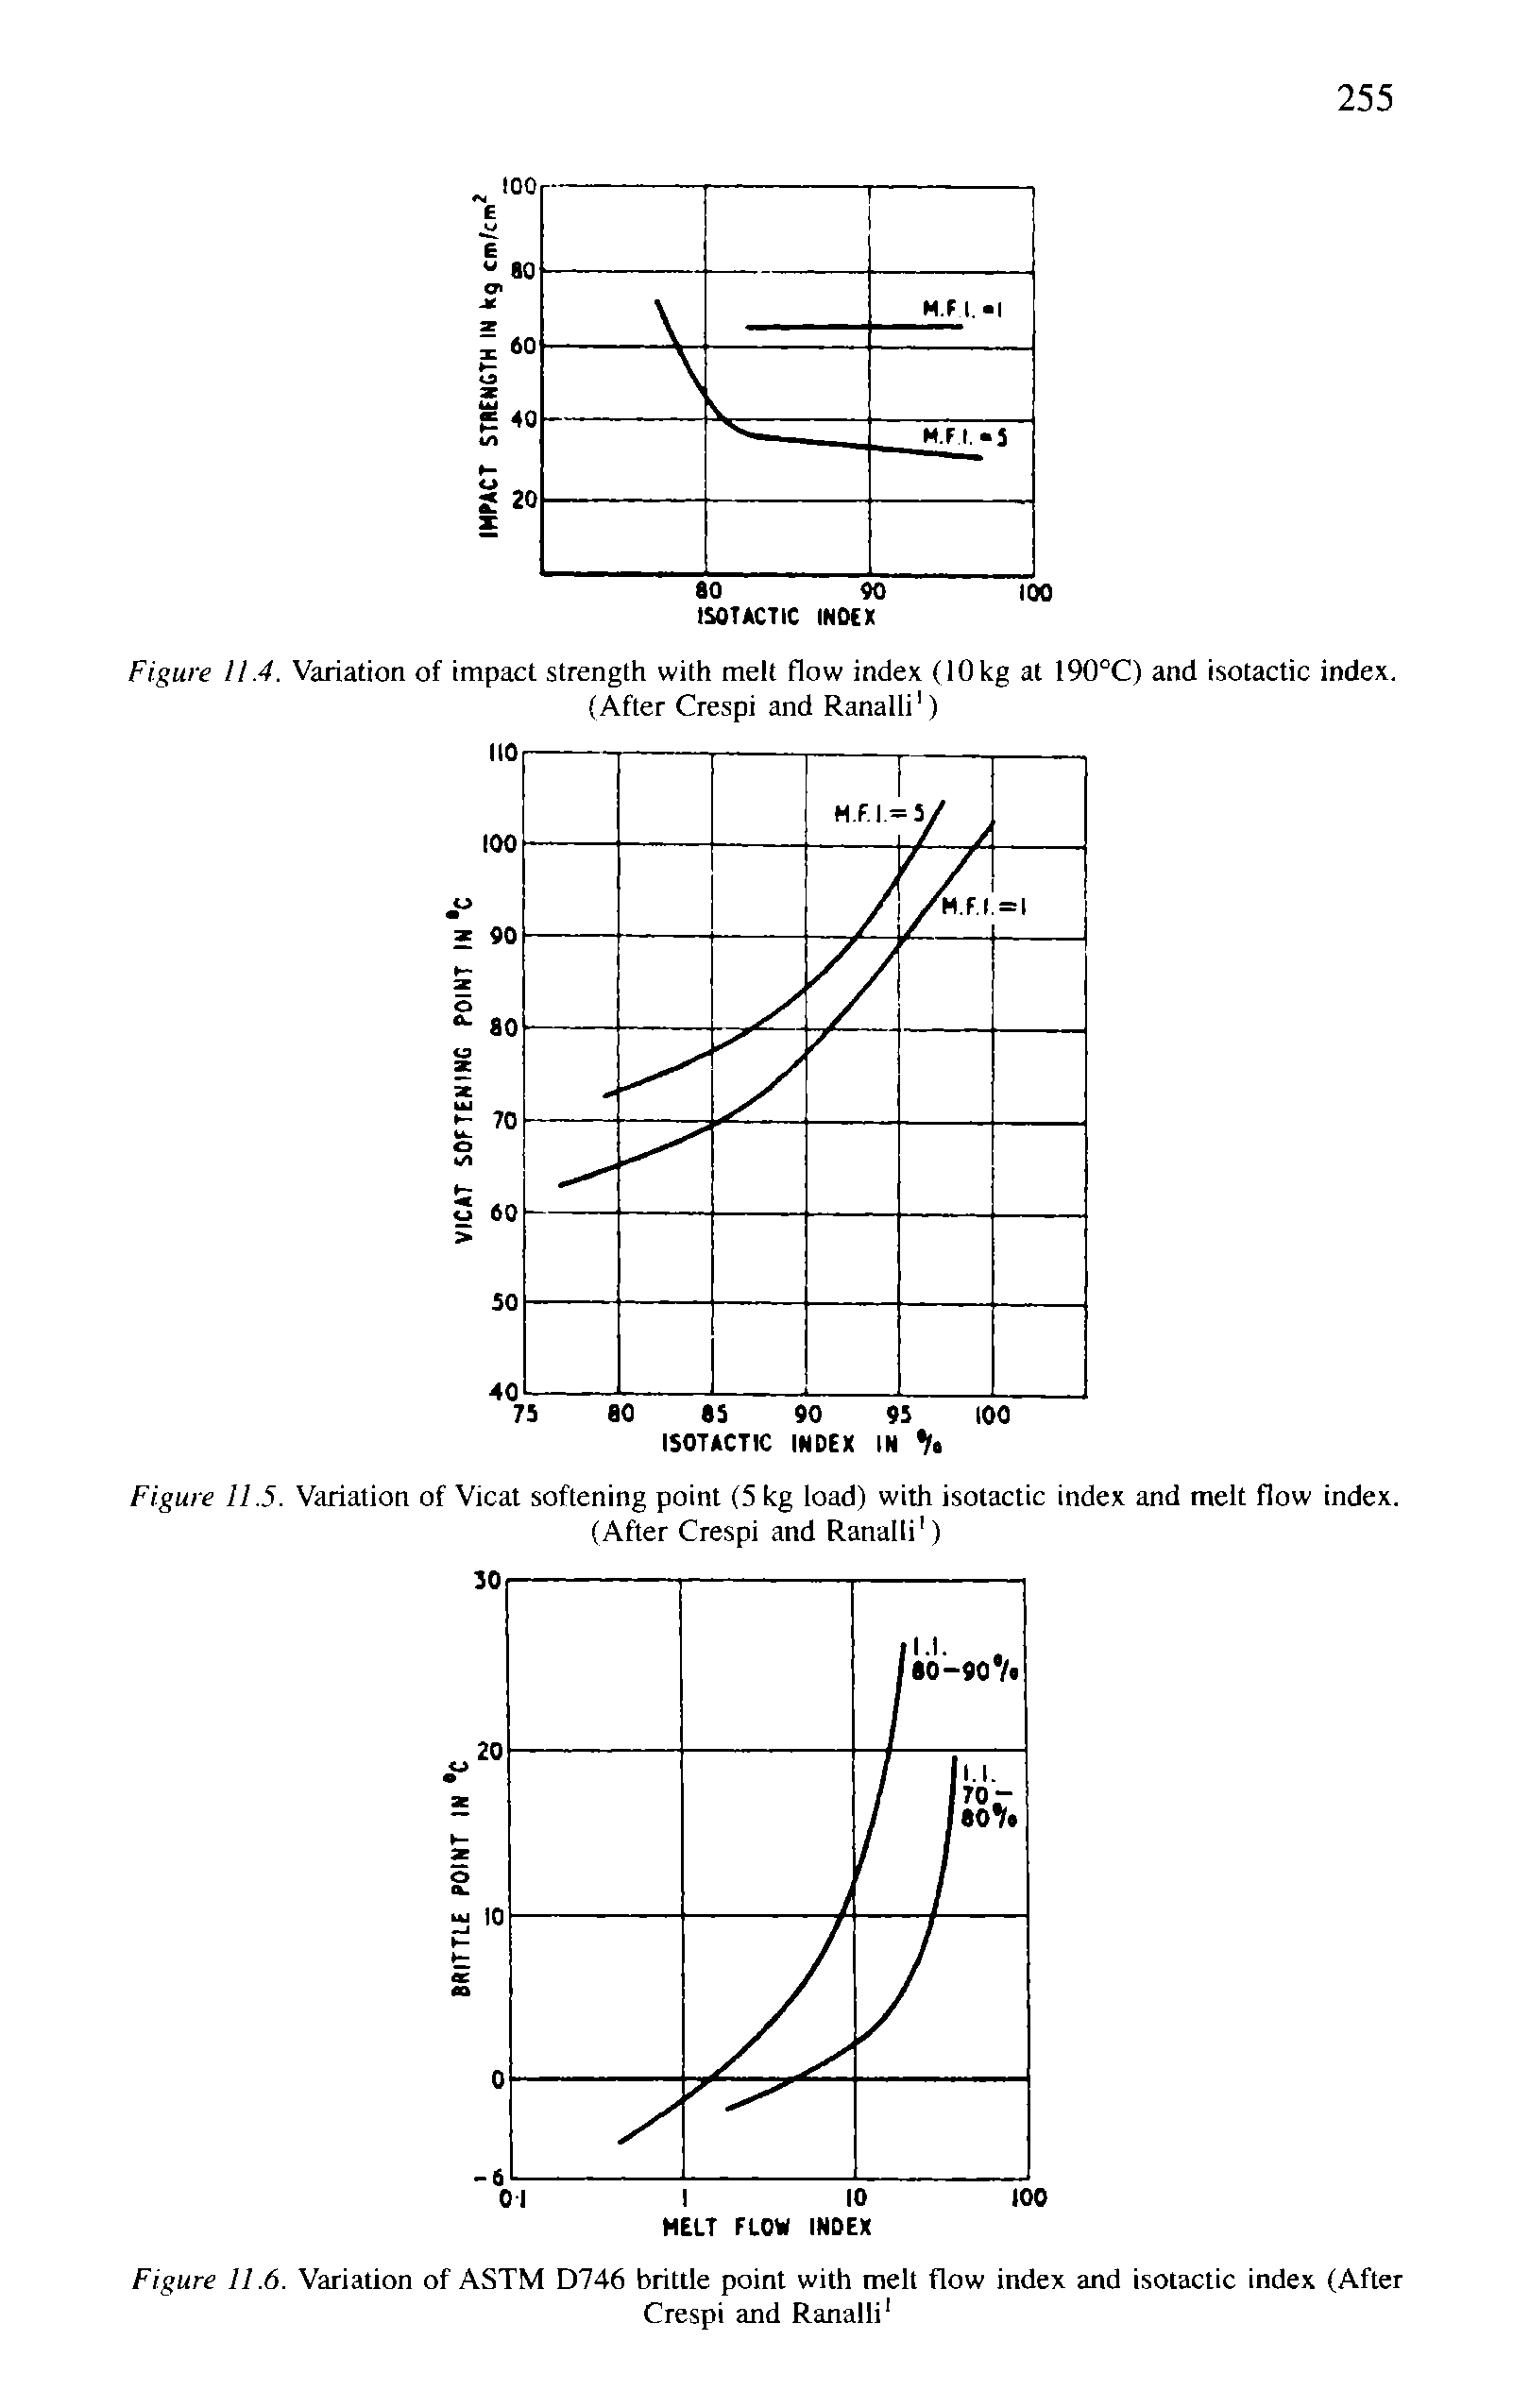 Figure 11.6. Variation of ASTM D746 brittle point with melt flow index and isotactic index (After...